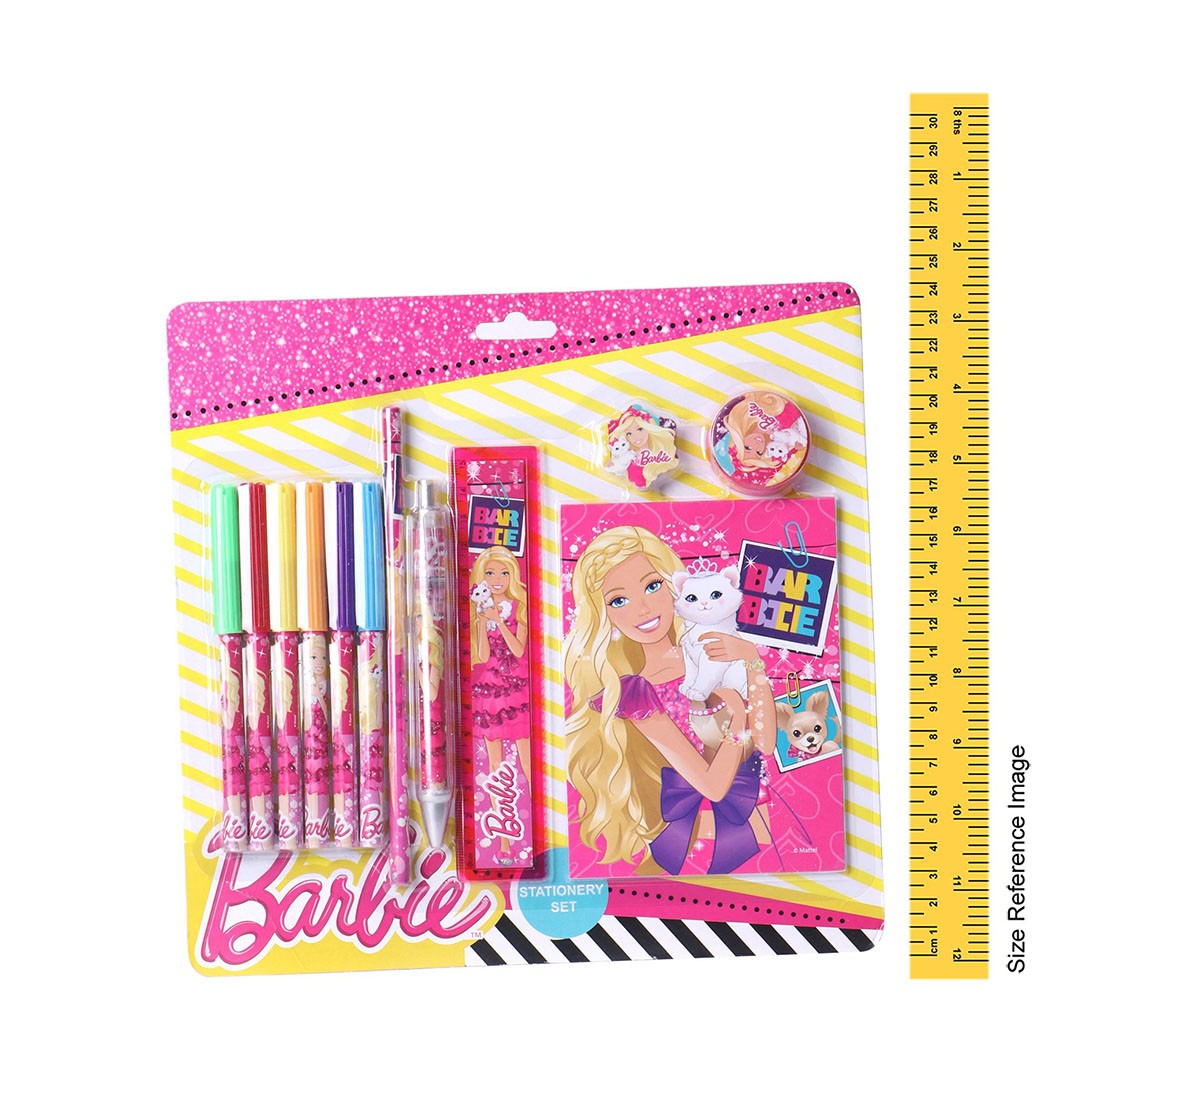 Barbie Stationery Set/ Kit Of 12 In Blister Card, 2Y+ (Multicolor)